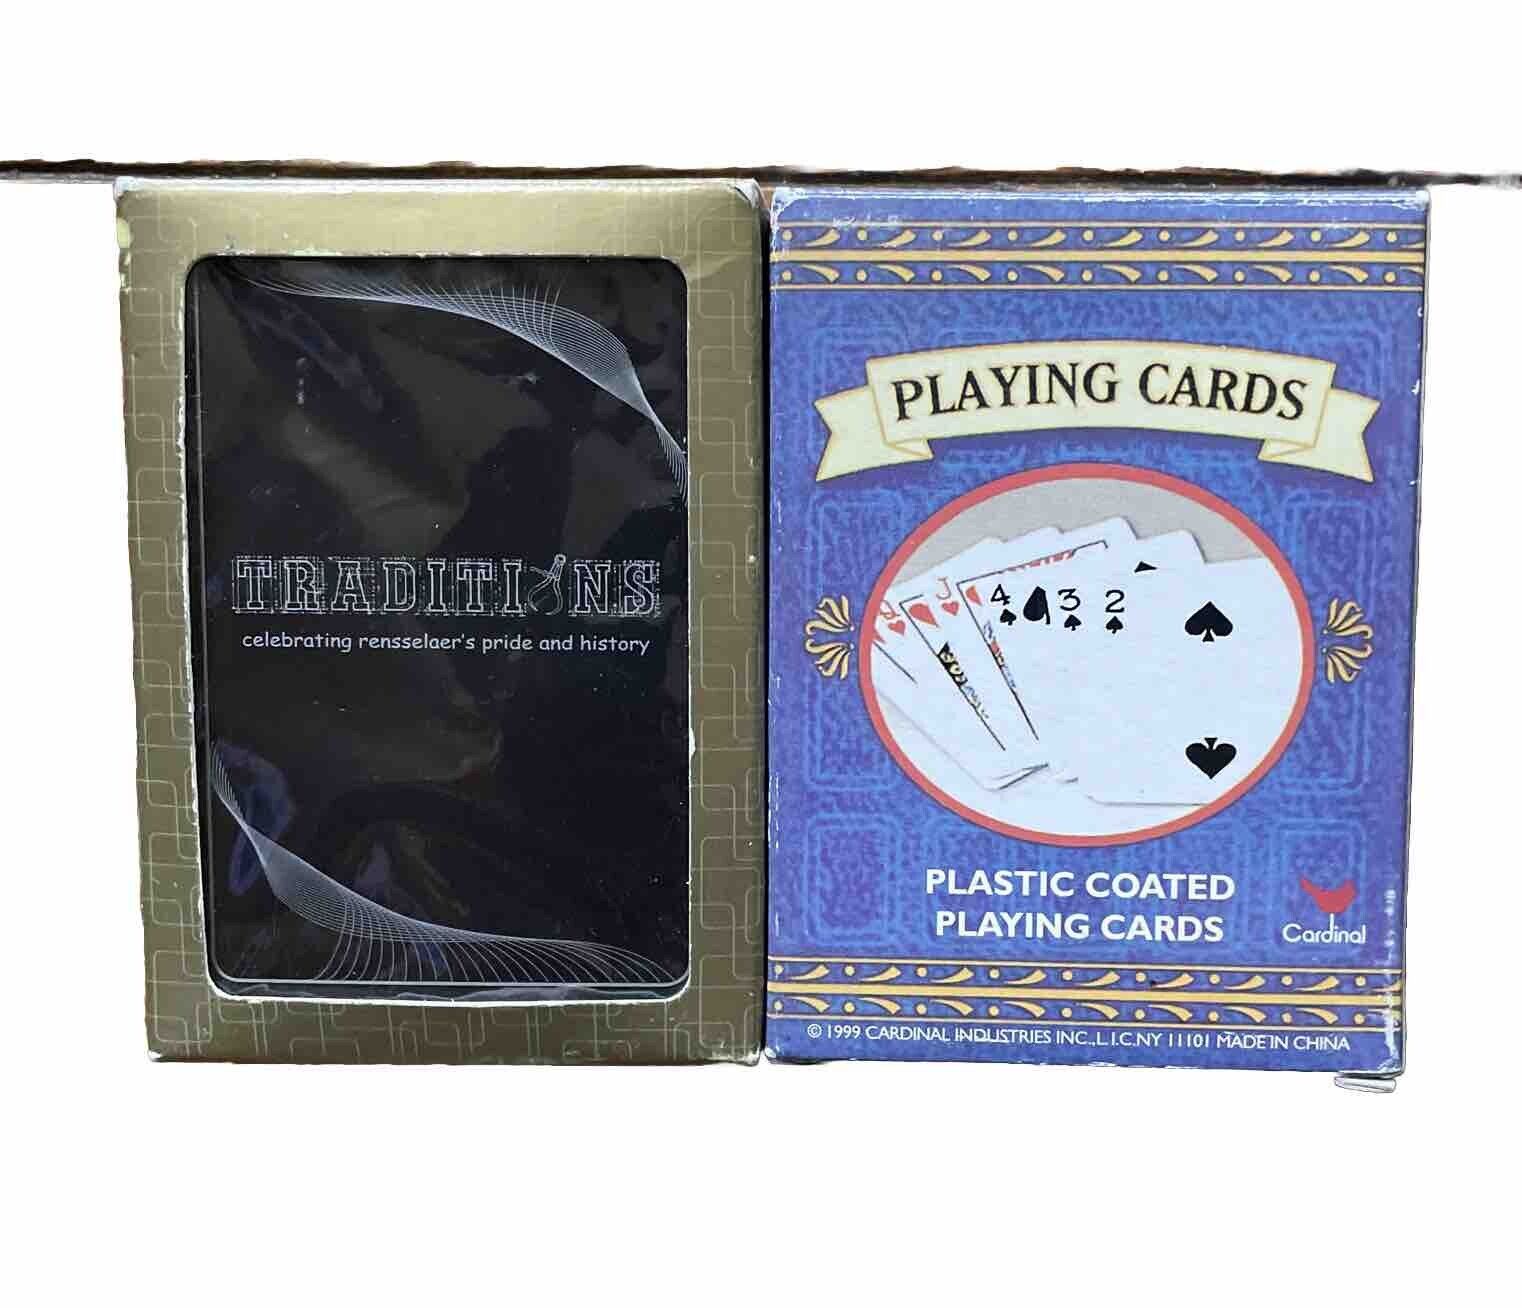 GEMACO TRADITIONS RENSSELAER, & CARDINAL 1999 Playing Cards Lot NICE